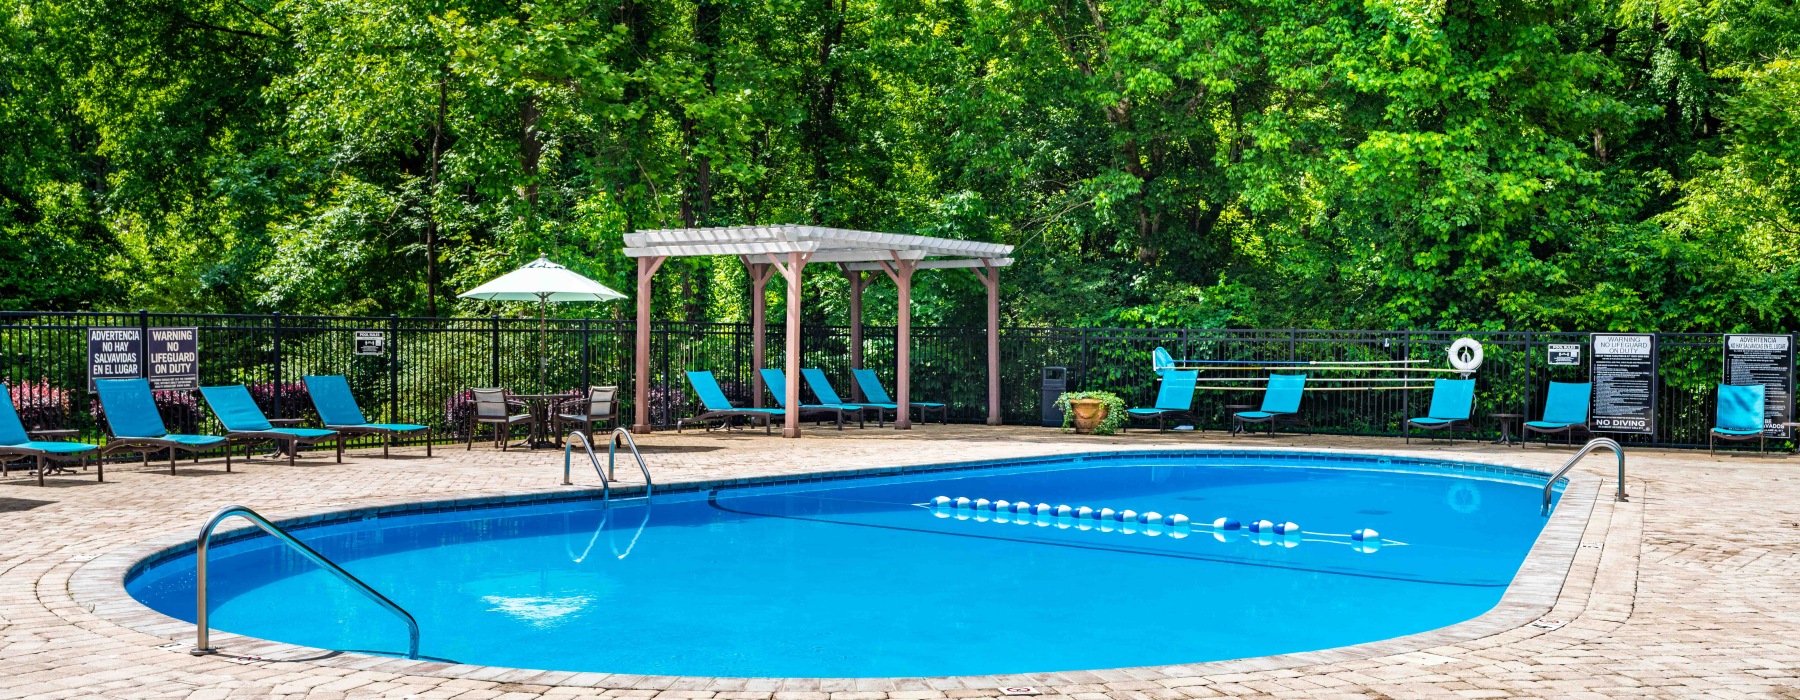 fenced in pool area with umbrella shaded tables and chairs